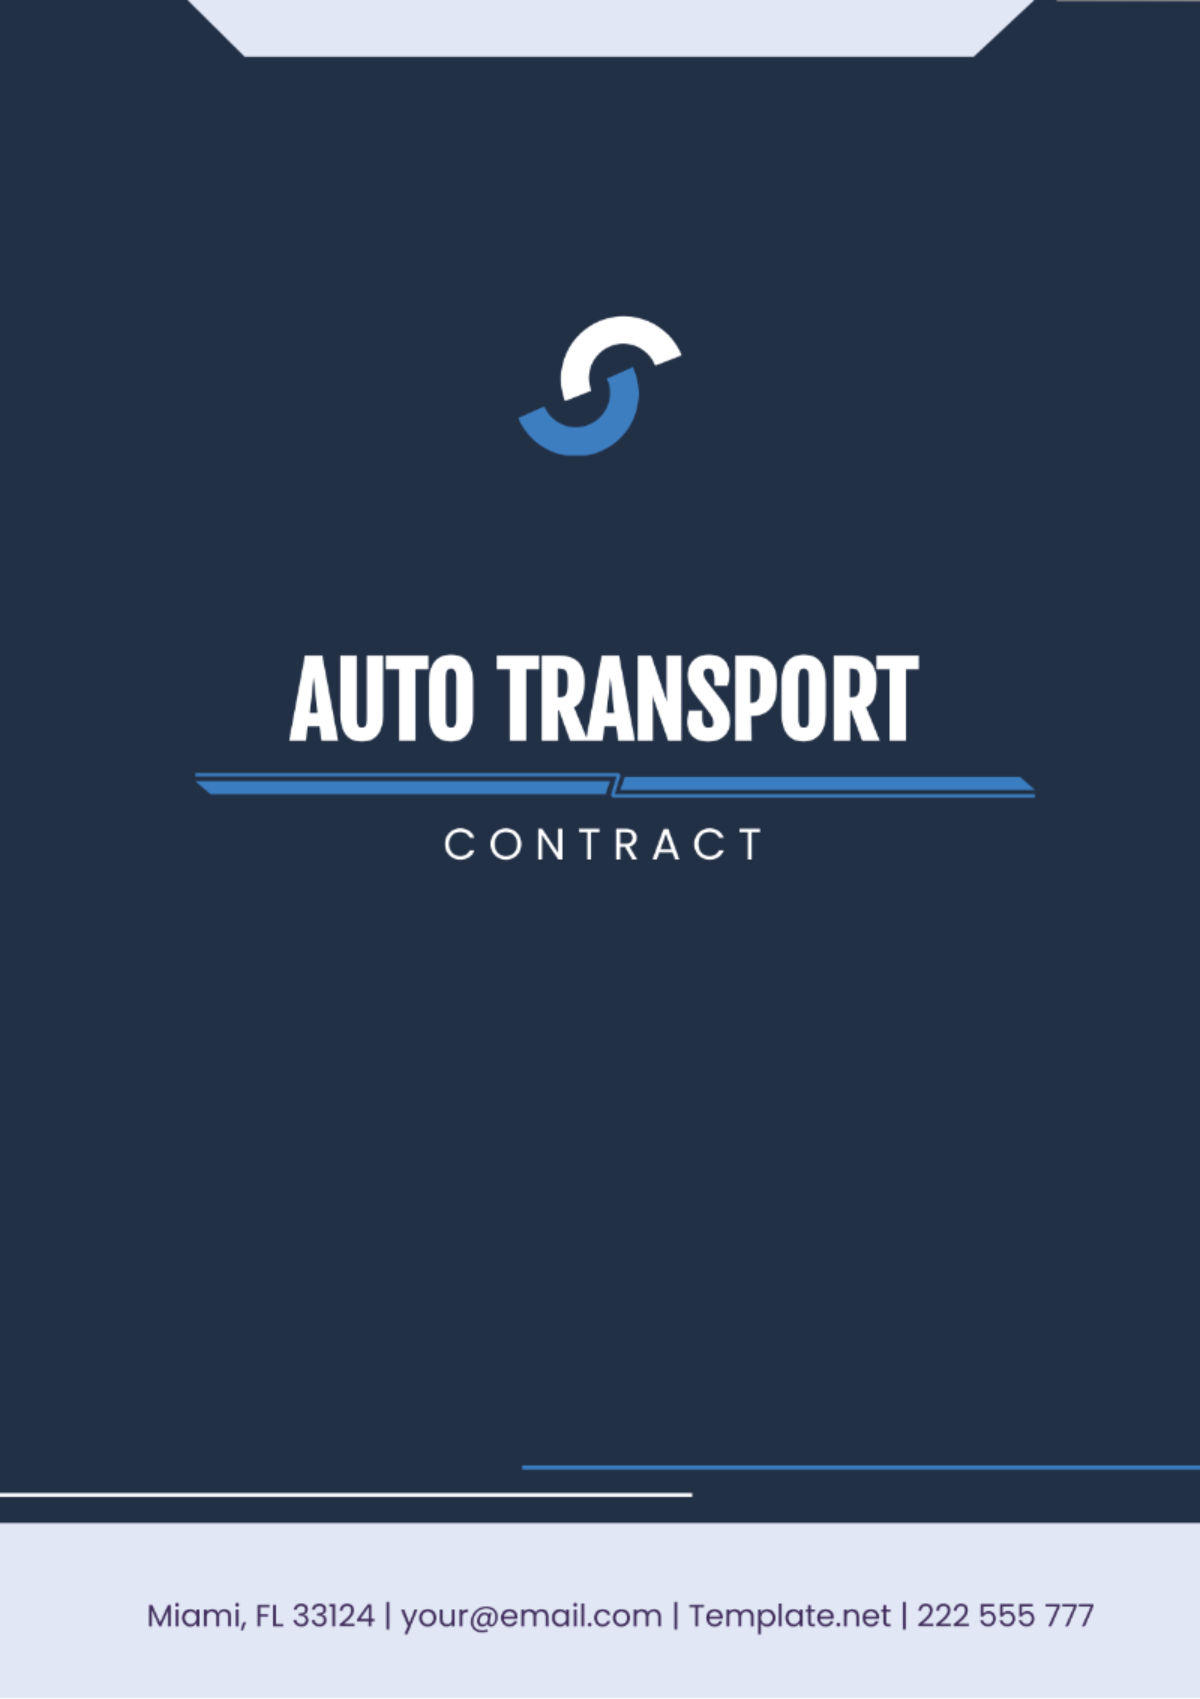 Auto Transport Contract Template